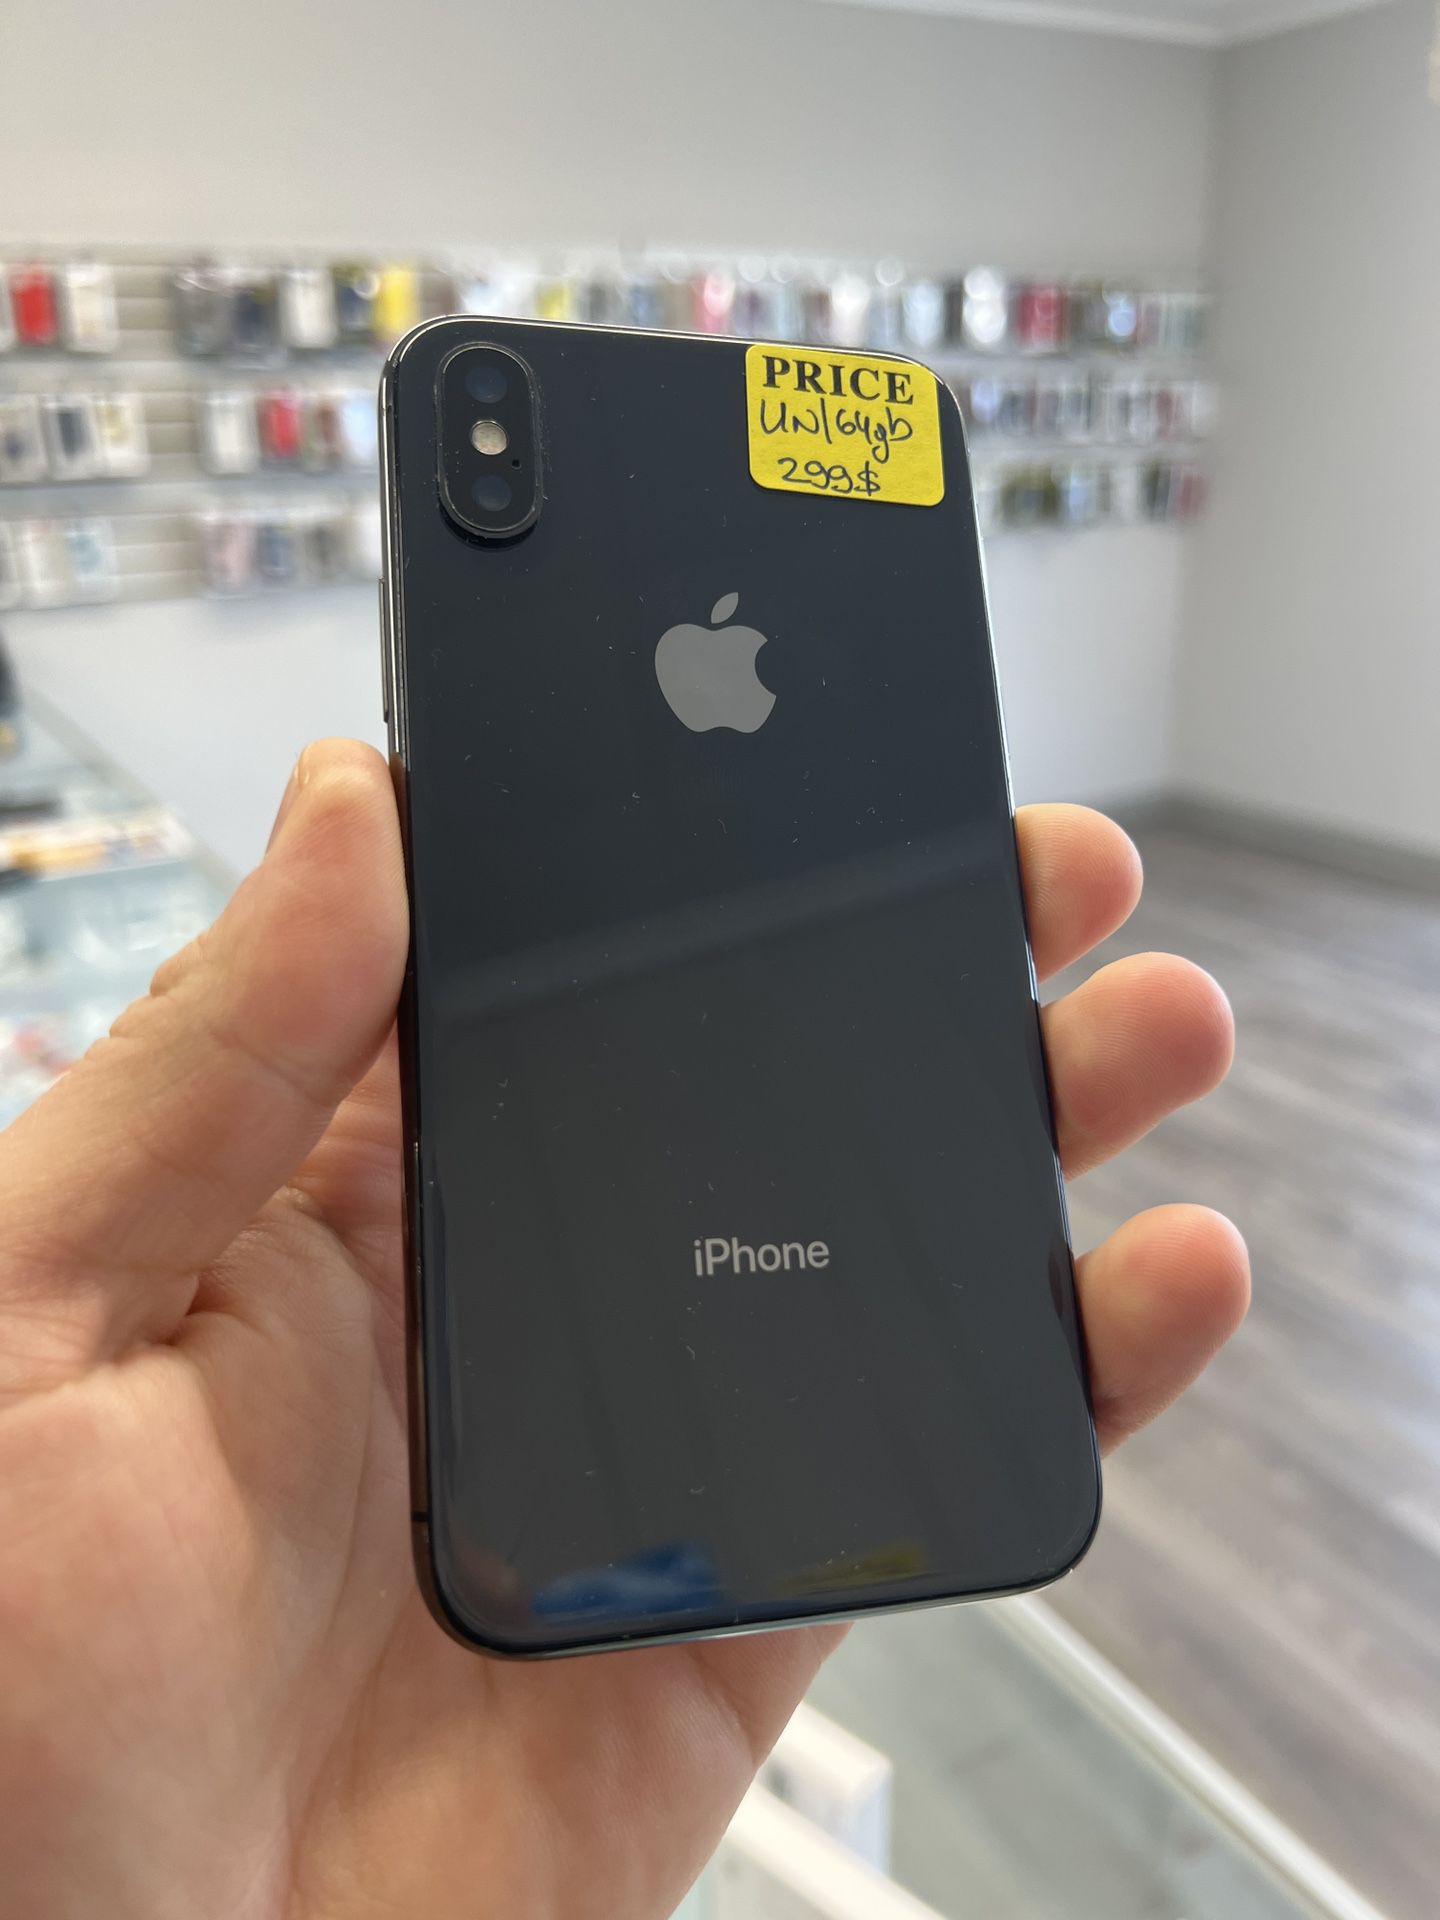 Apple Iphone X Unlocked 64gb for Sale in Yalesville, CT - OfferUp